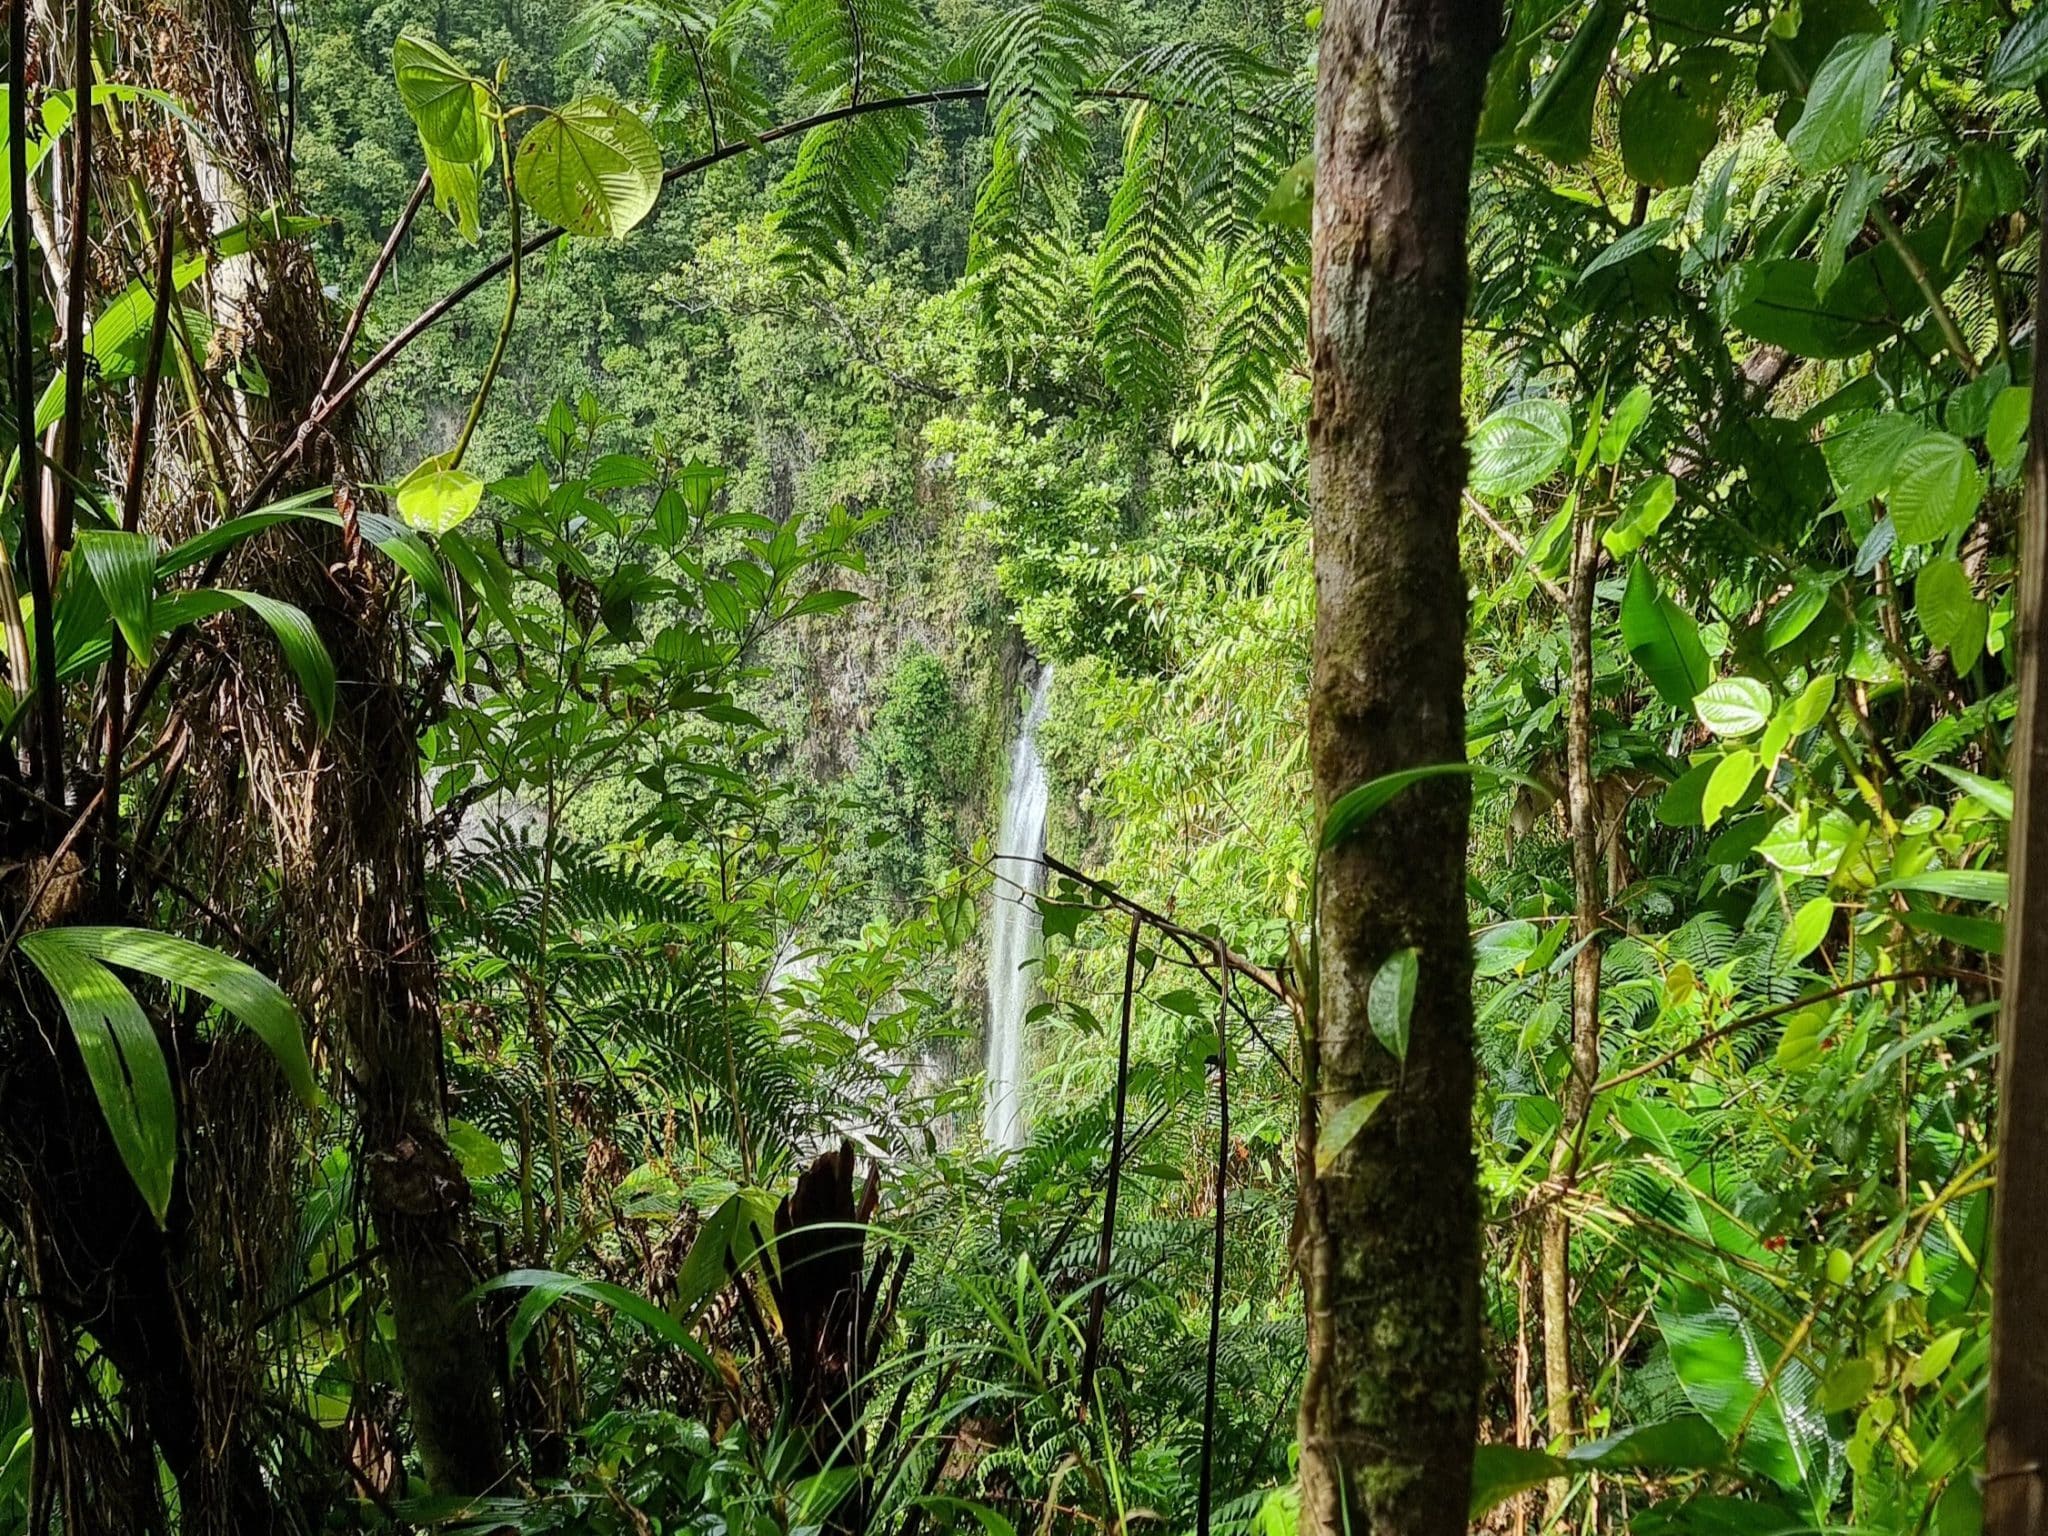 How To Visit The Middleham Falls In Dominica